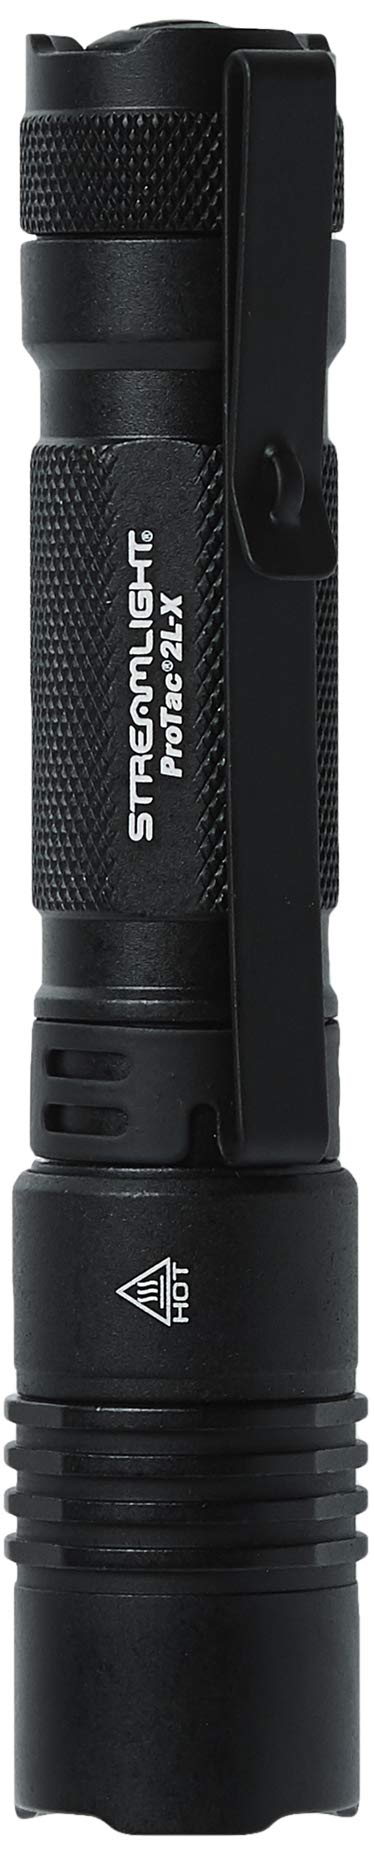 STREAMLIGHT 88063 ProTac 2L-X 500 Lumen Professional Tactical Flashlight with High/Low/Strobe Dual Fuel Use 2x CR123A or 1x Rechargeable Li-iON Batteries and Holster - 500 Lumens,Black W/ CR123A Batteries Easy-open Box - BeesActive Australia